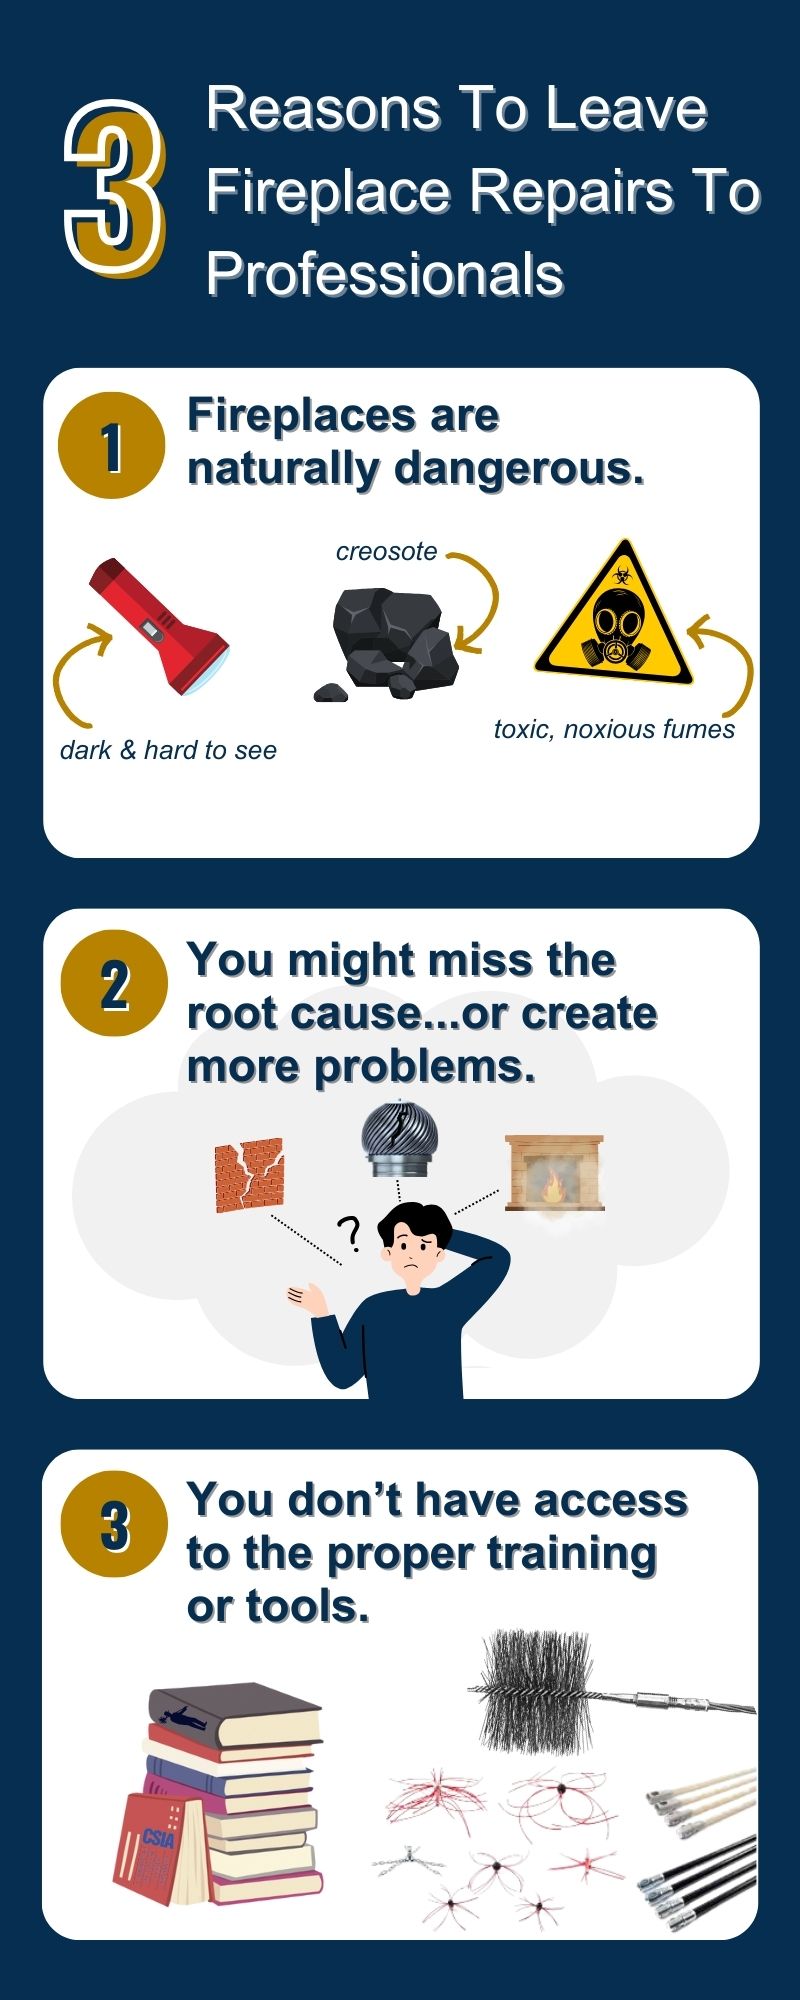 original infographic stating "3 Reasons To Leave Fireplace Repairs To Professionals"